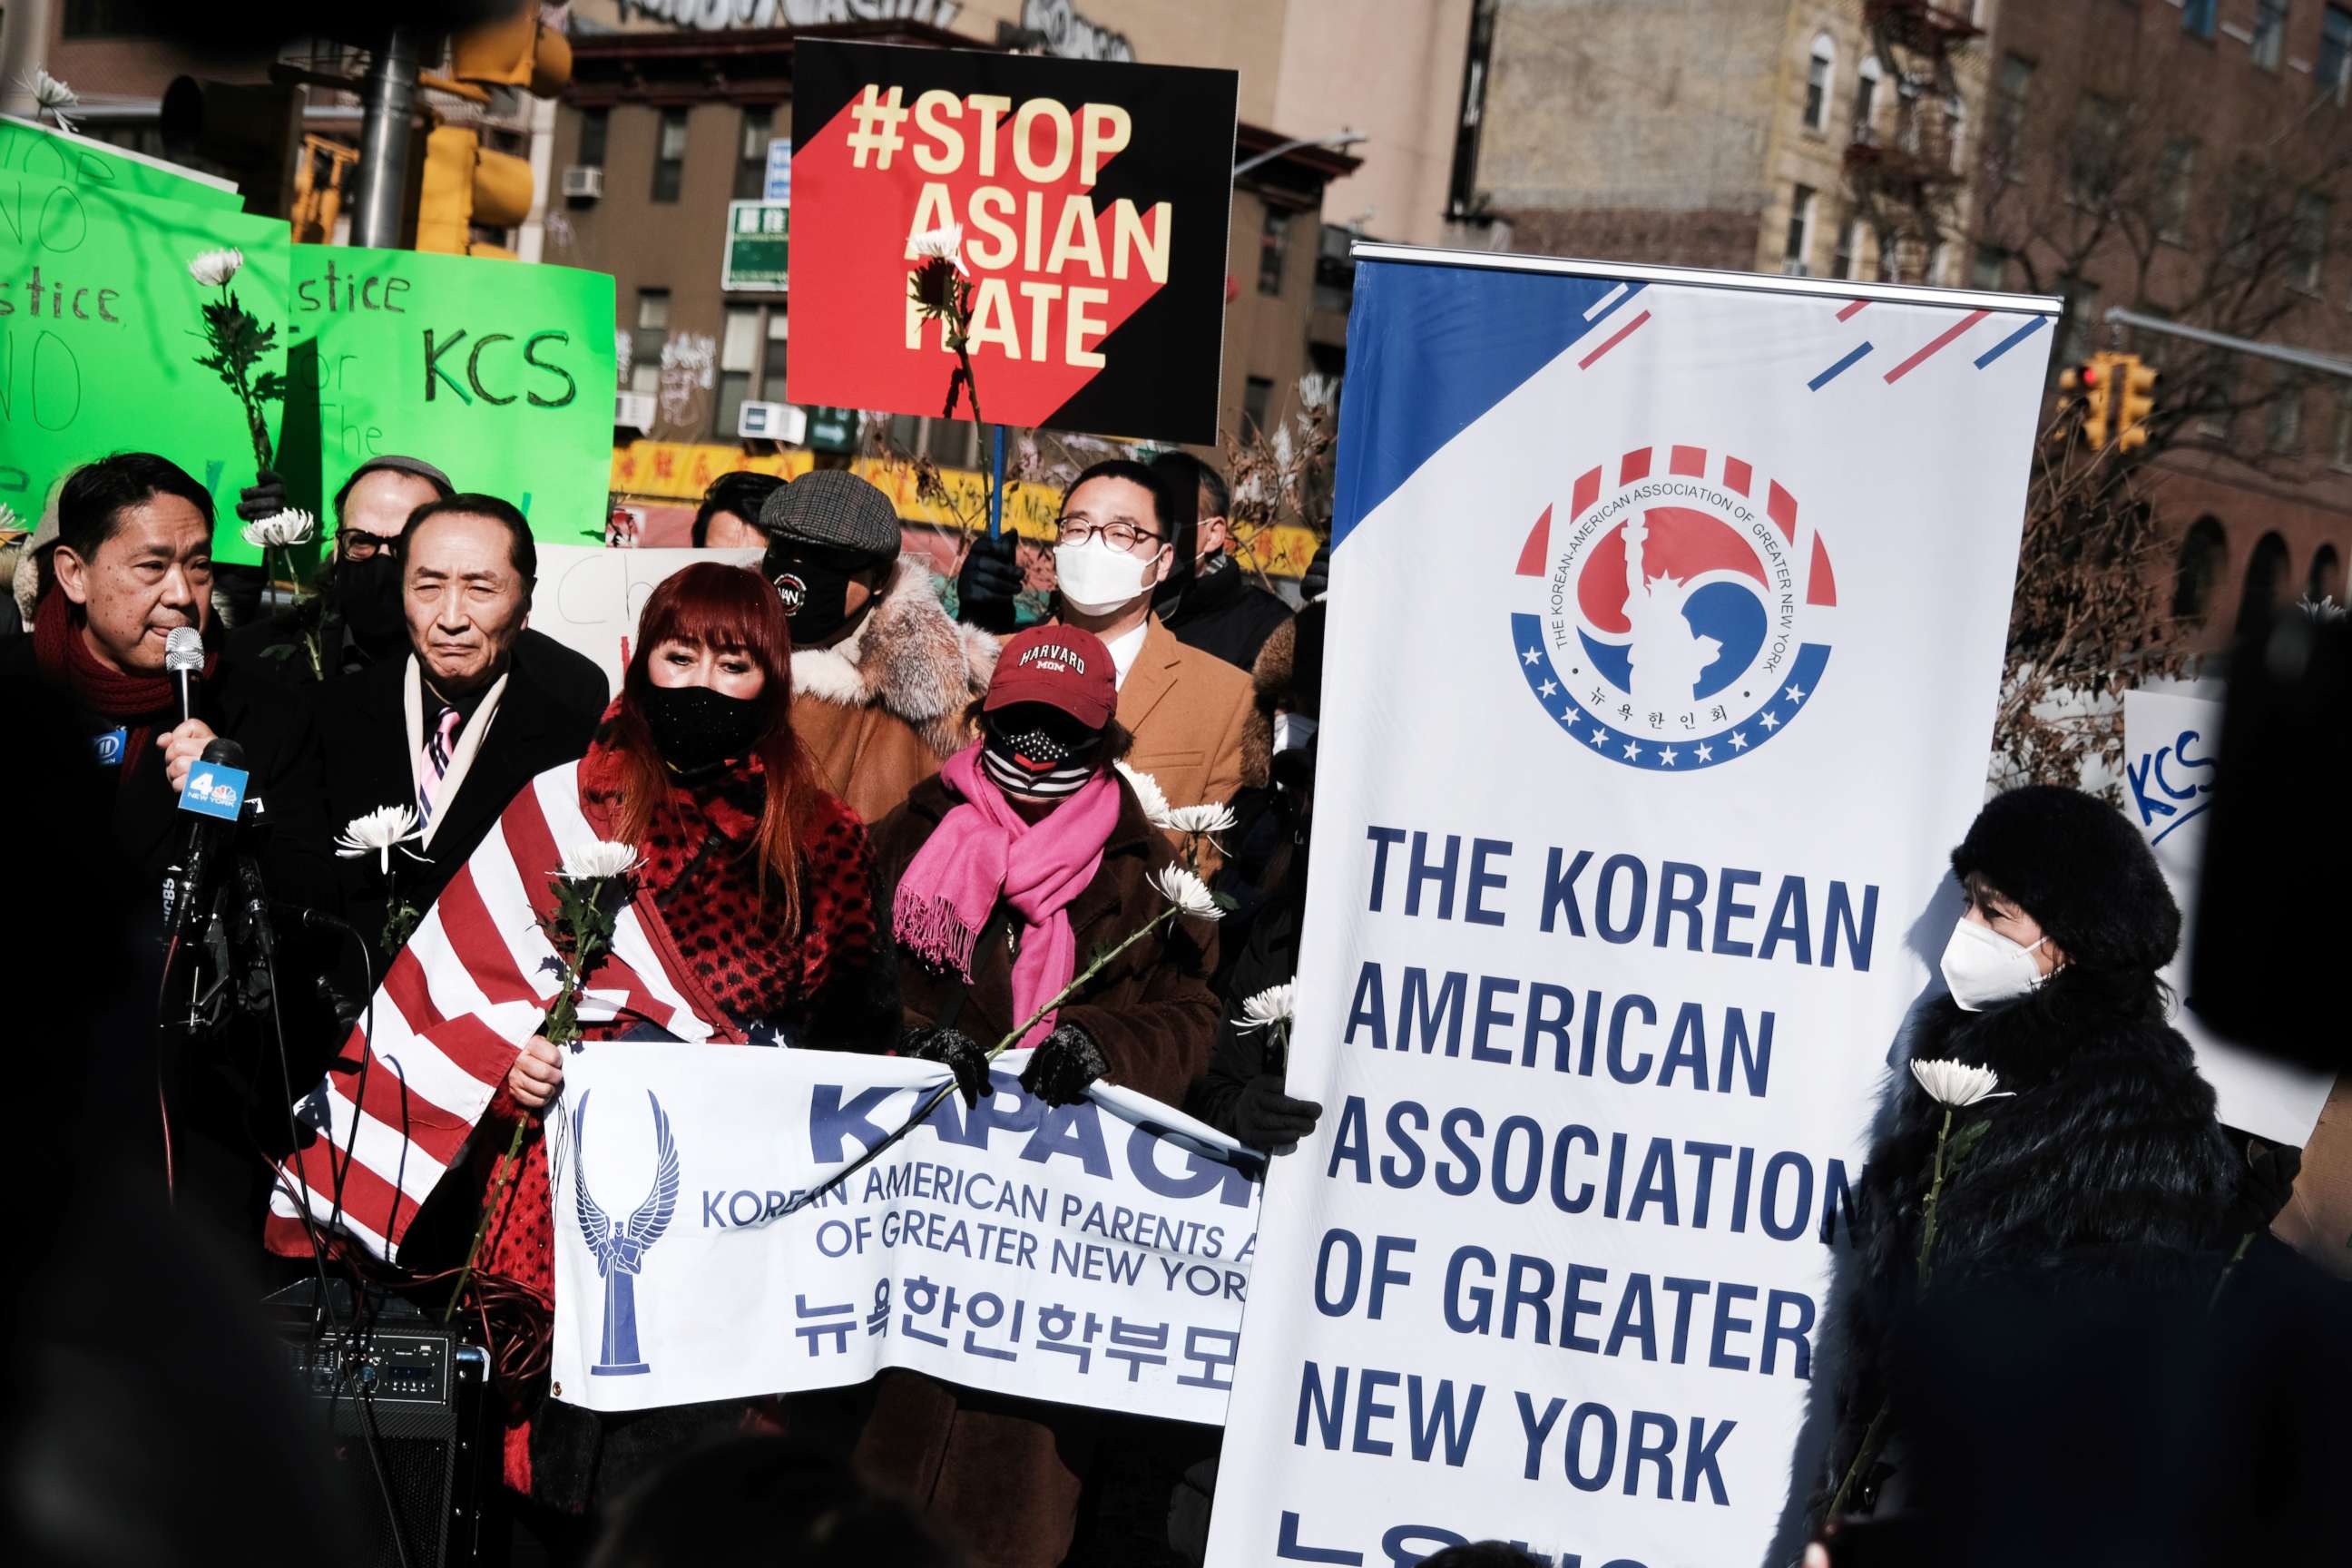 PHOTO: Members of the Korean American Association and others hold a rally and news conference near the building where Christina Yuna Lee was murdered in the early hours of February 13th after she was followed home, Feb. 15, 2022 in New York City.